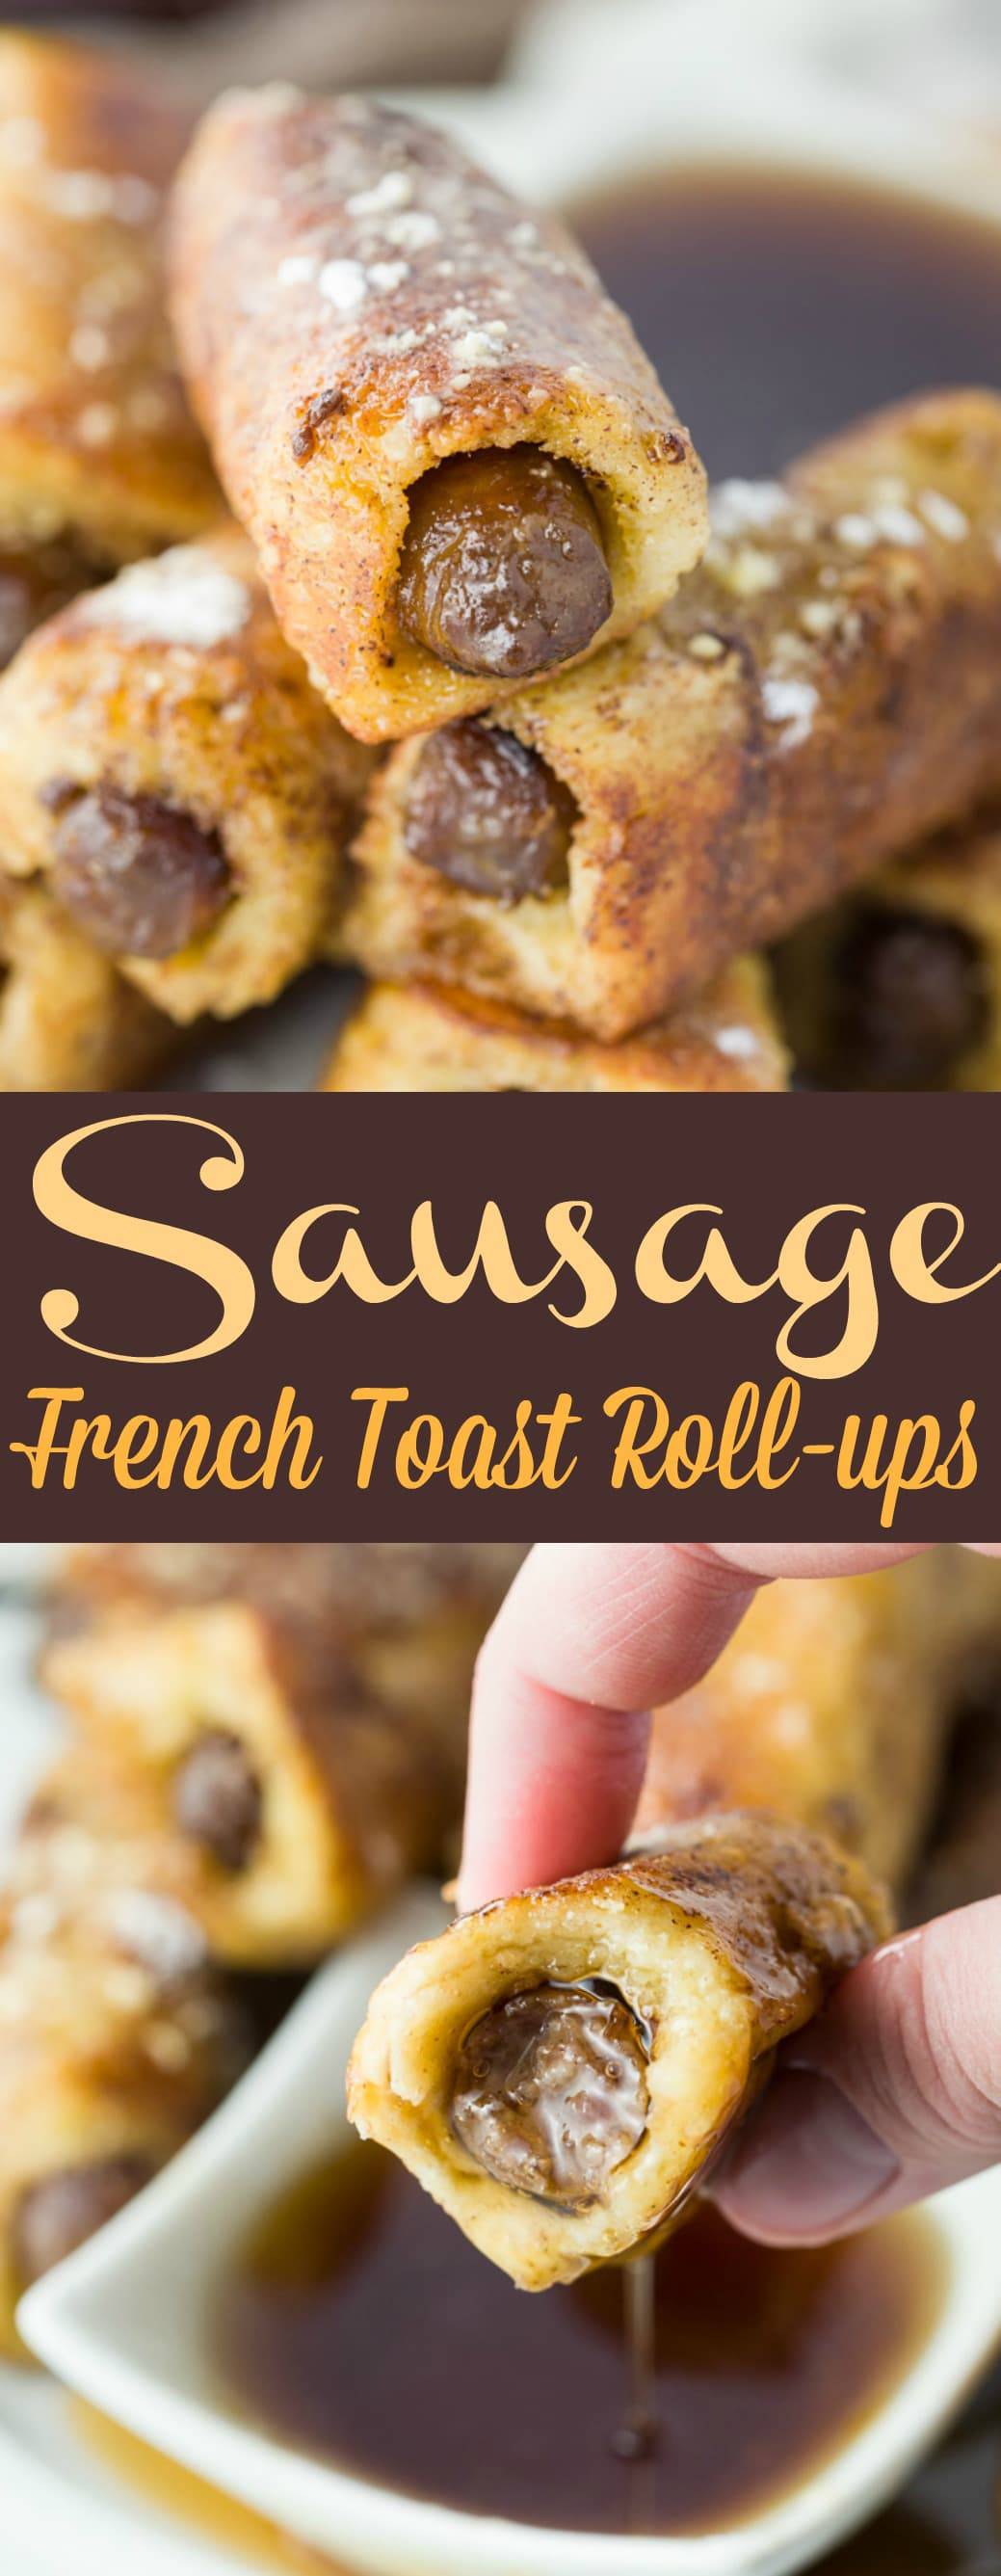 French Toast Roll-ups with Sausage - The Cozy Cook